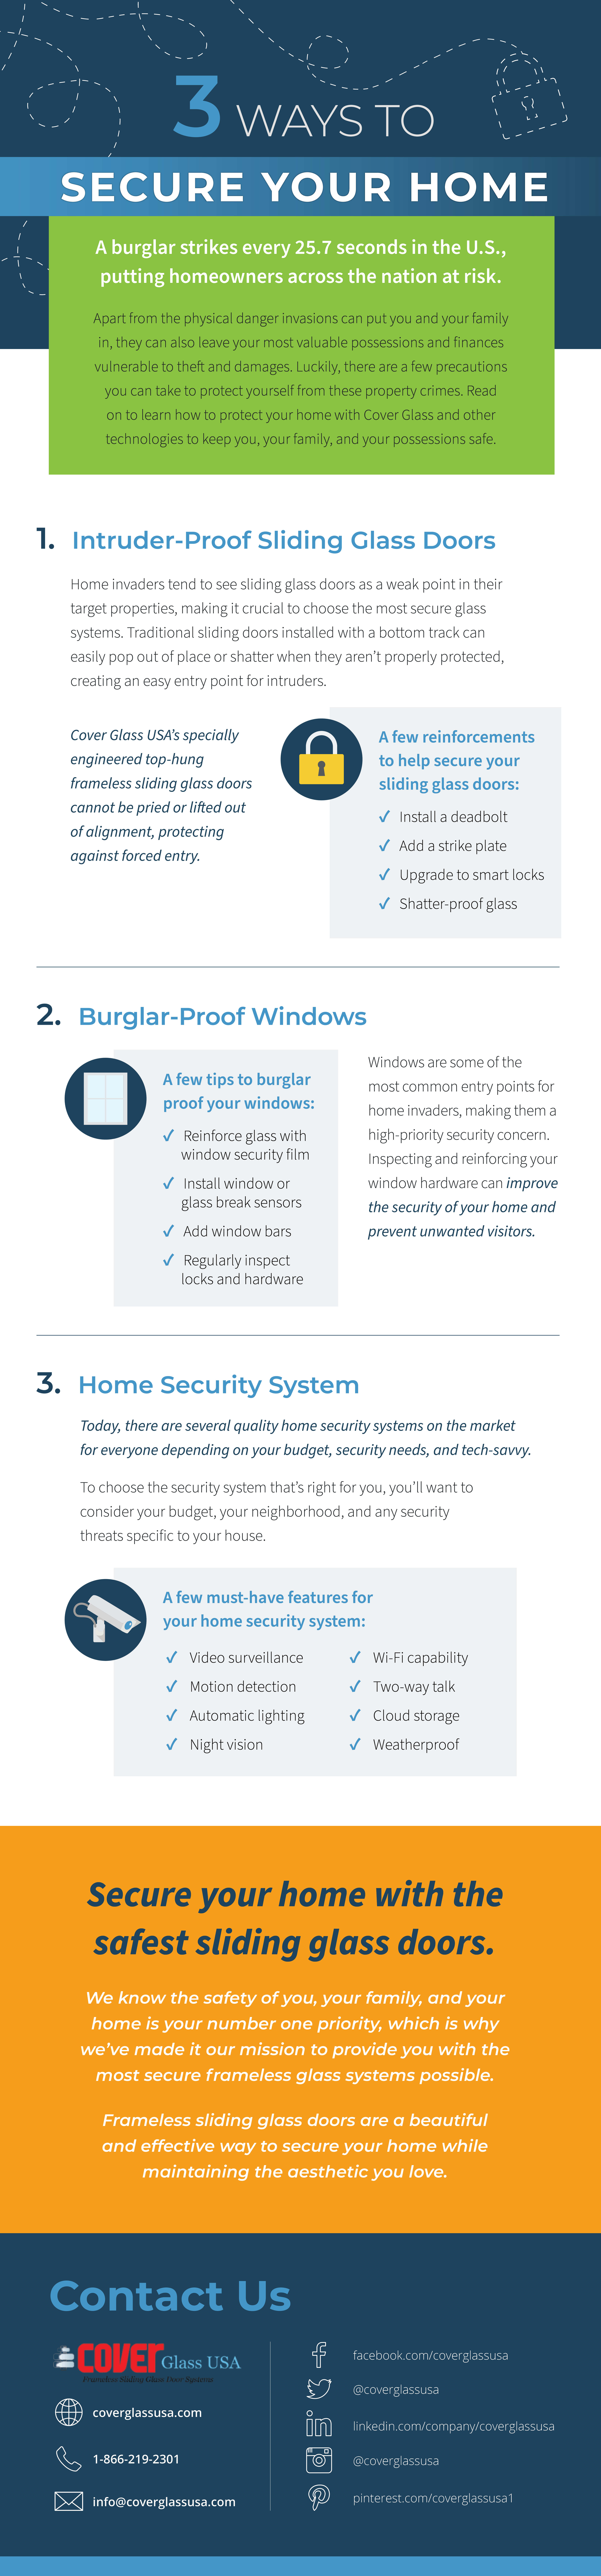 Three ways to secure your home